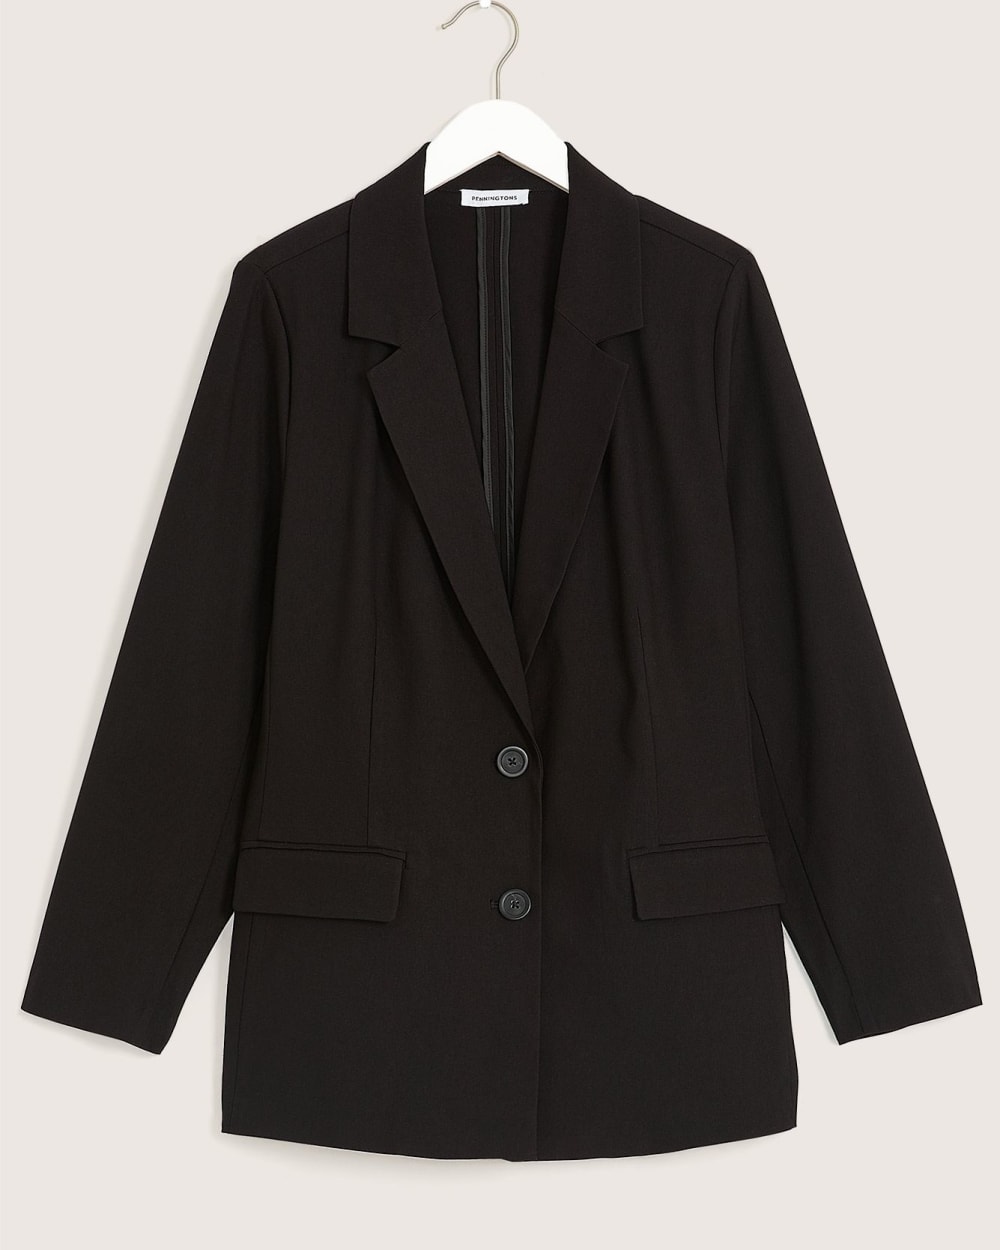 Responsible, Single-Breasted Black Blazer with Notched Lapel | Penningtons